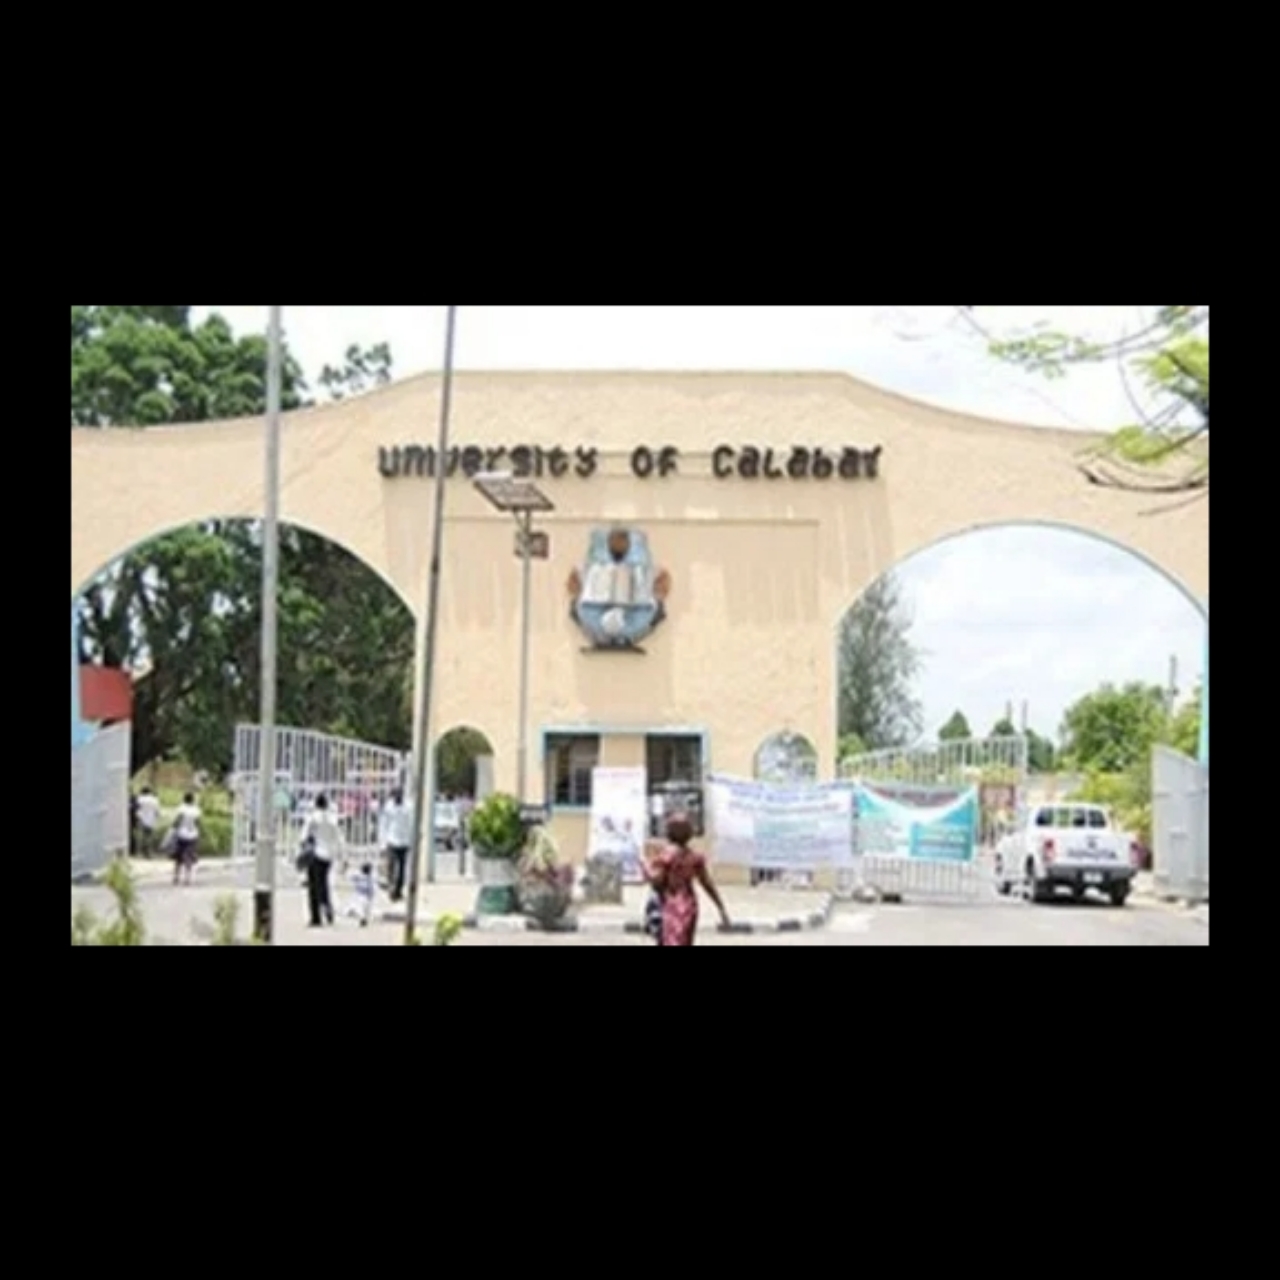 Certificate fraud: UNICAL Law Professor demoted to graduate assistant